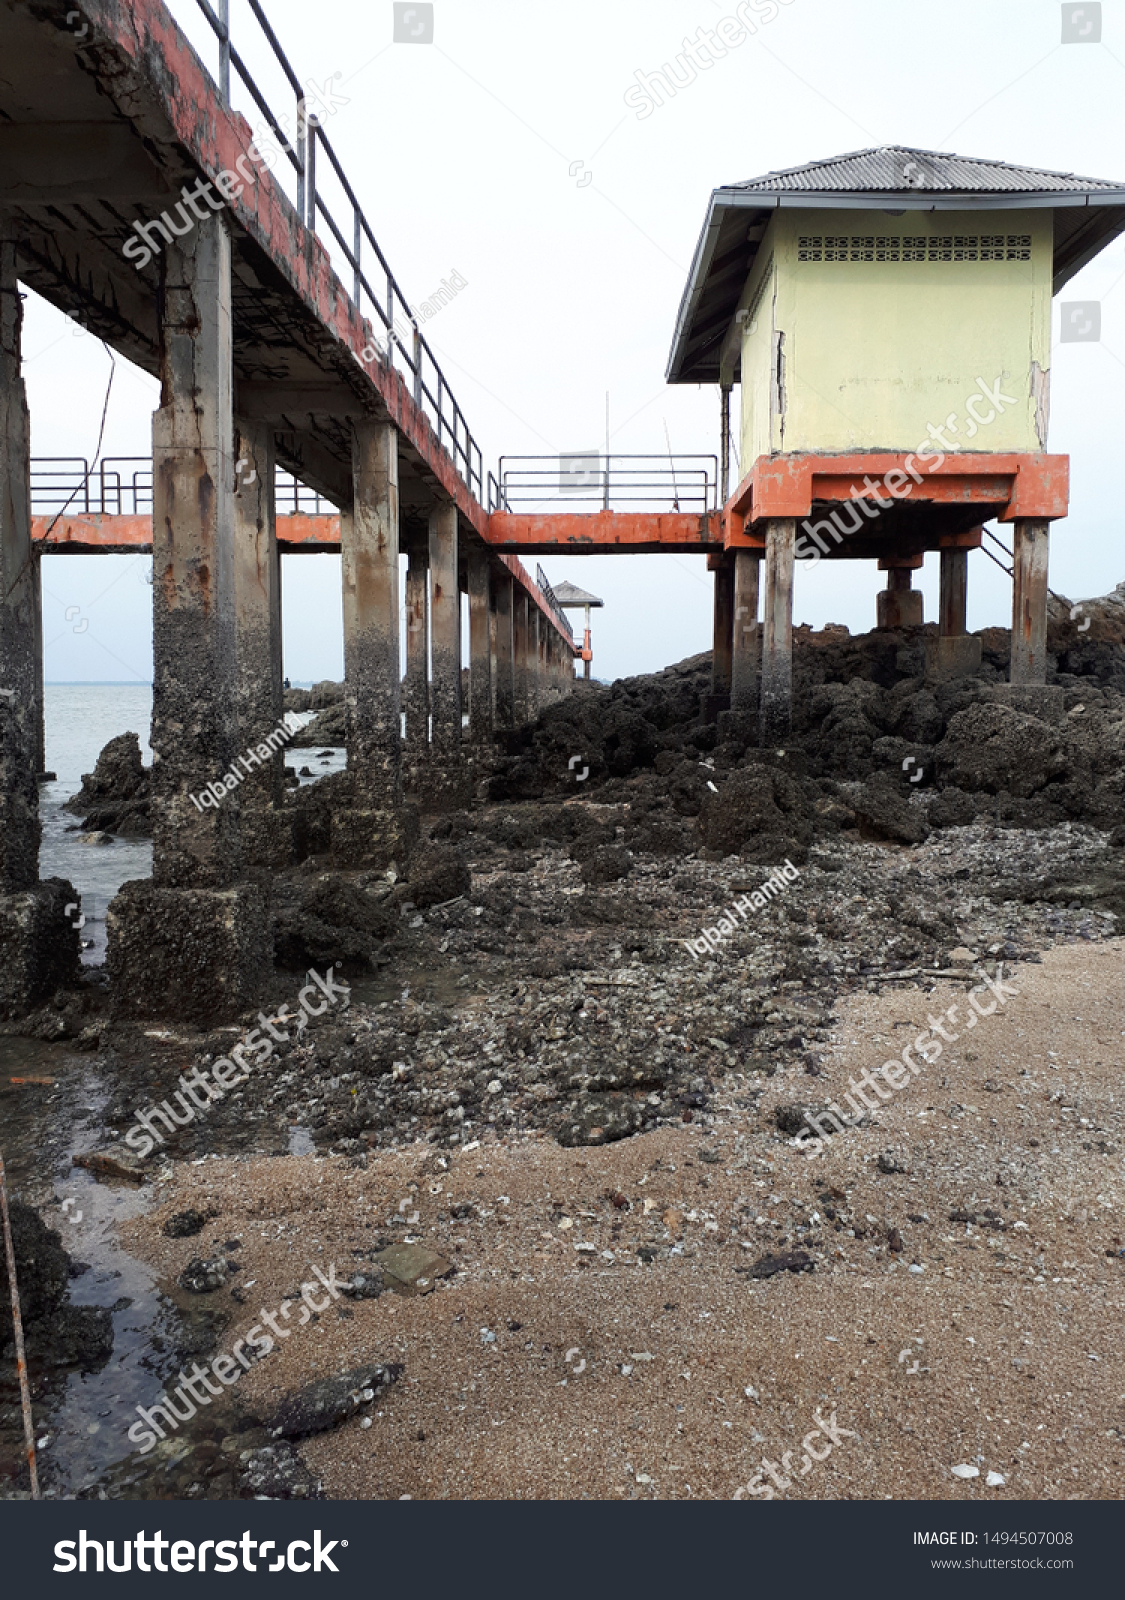 Previously the island served as a research site for the University of Selangor's.but is now only abandoned and poorly managed, as a temporary place for fishermen and stormwater fishermen. #1494507008